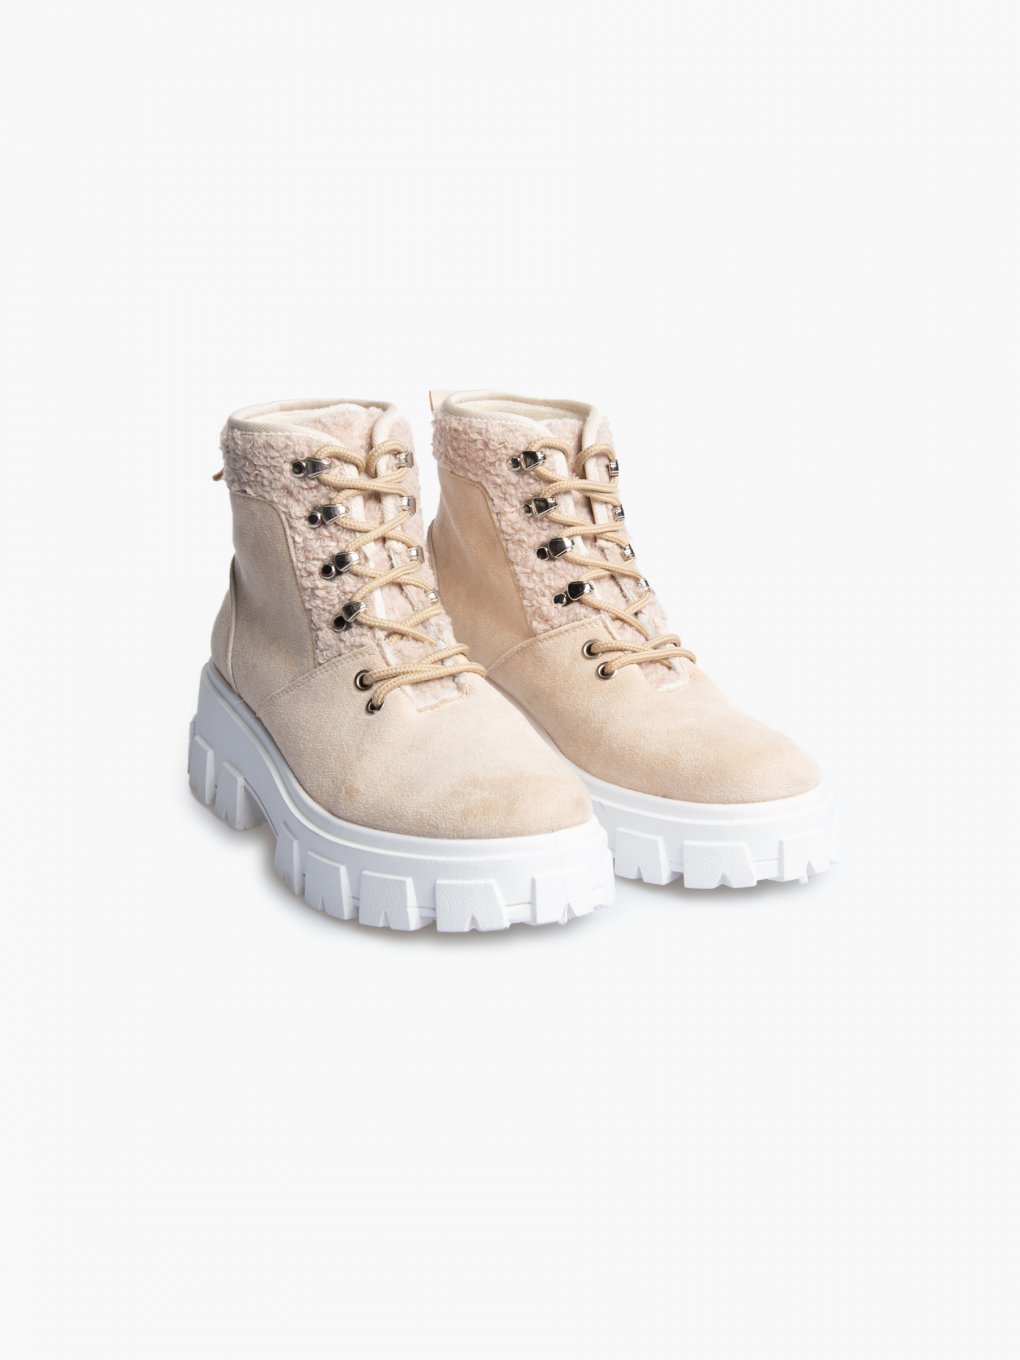 Lace-up anke boots